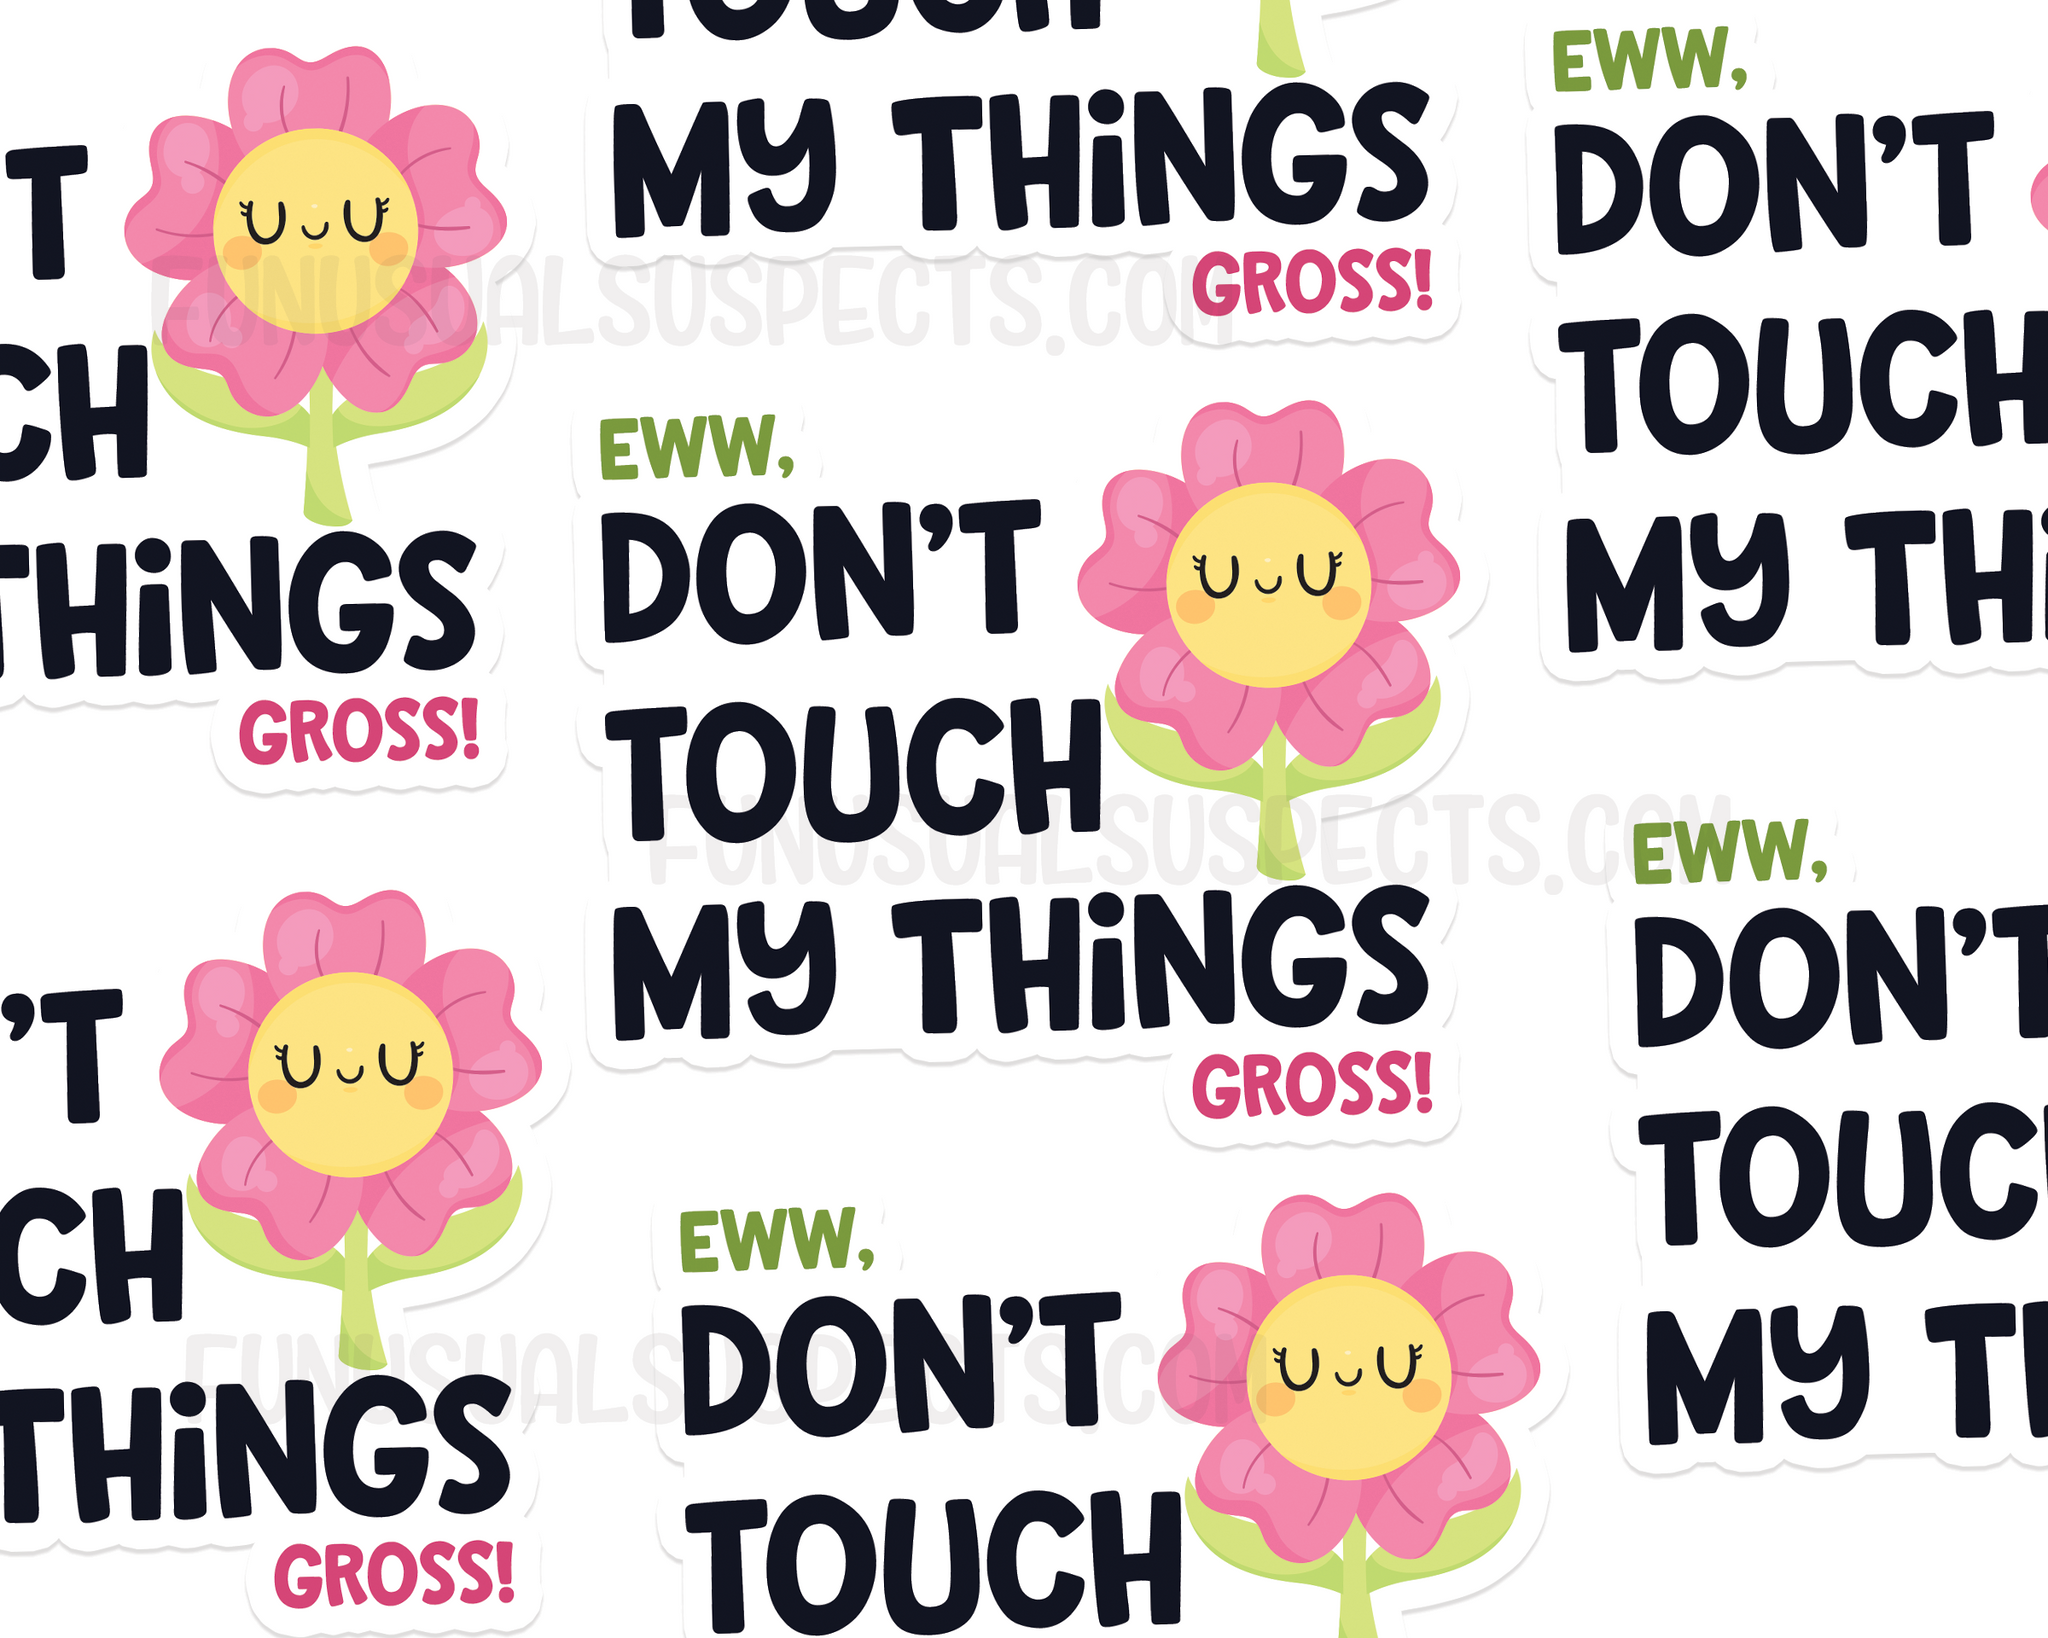 Don't Touch My Things Sticker